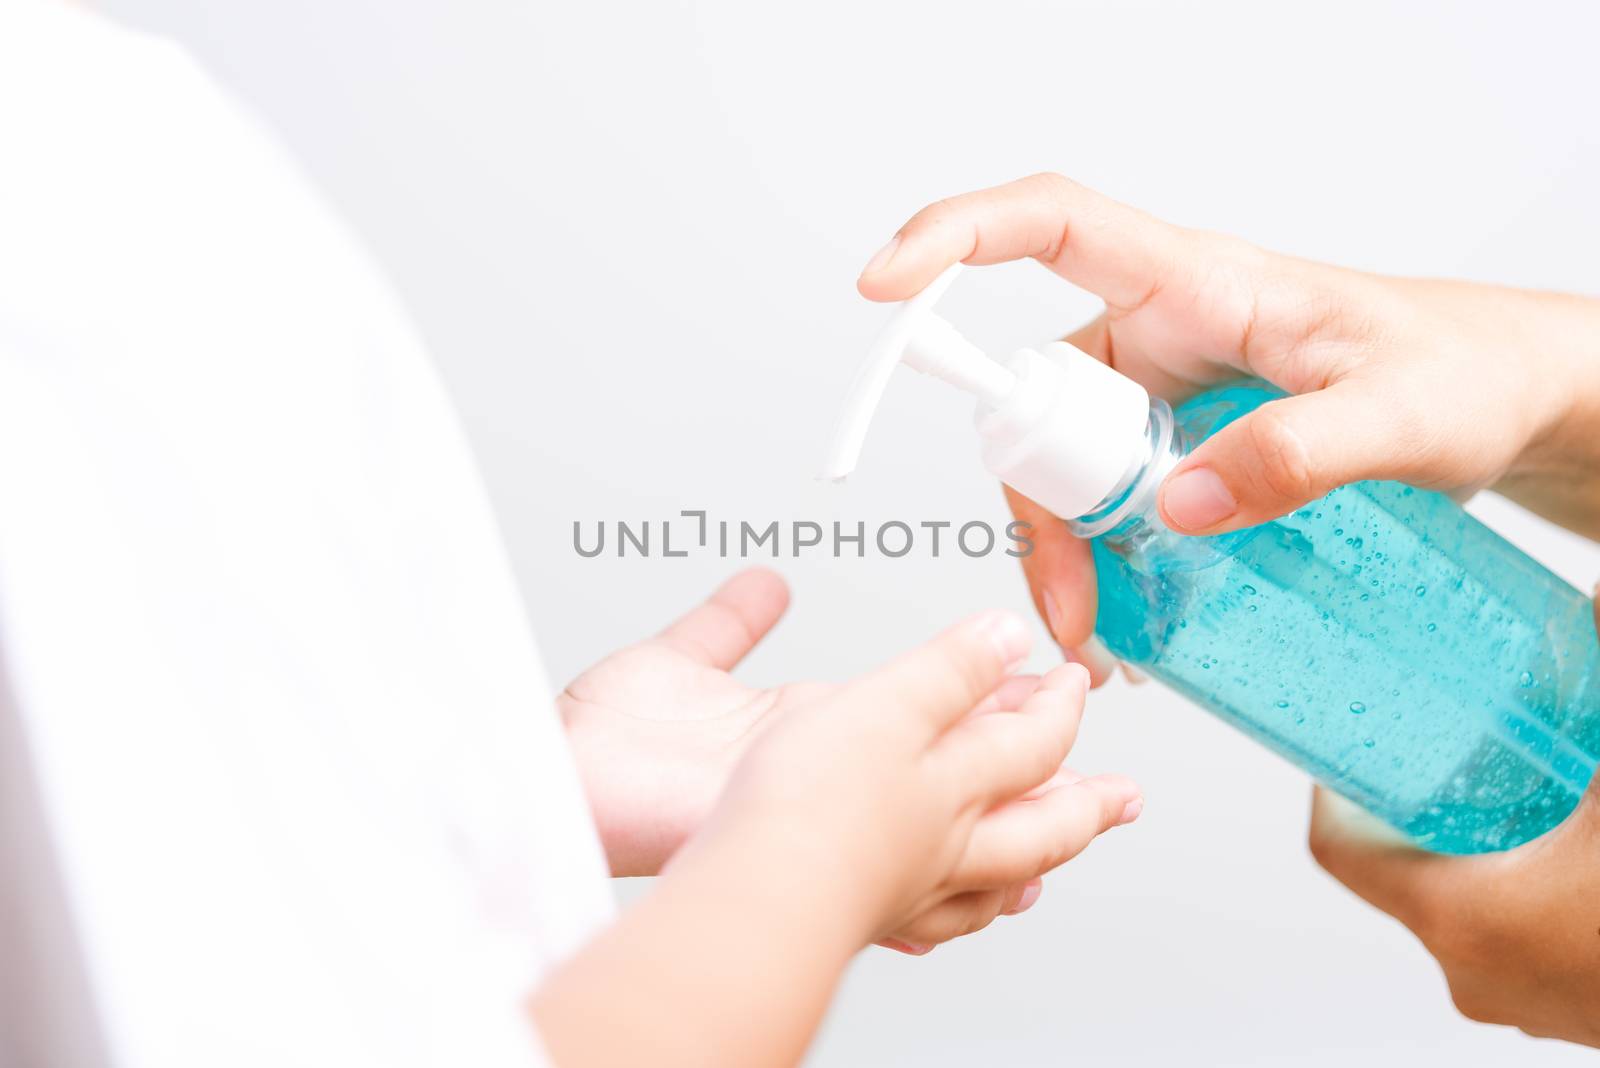 Closeup Asian Mother applying bottle pump dispenser sanitizer alcohol gel cleaning washing hands little child boy COVID-19 or coronavirus protection concept, isolated white background with copy space